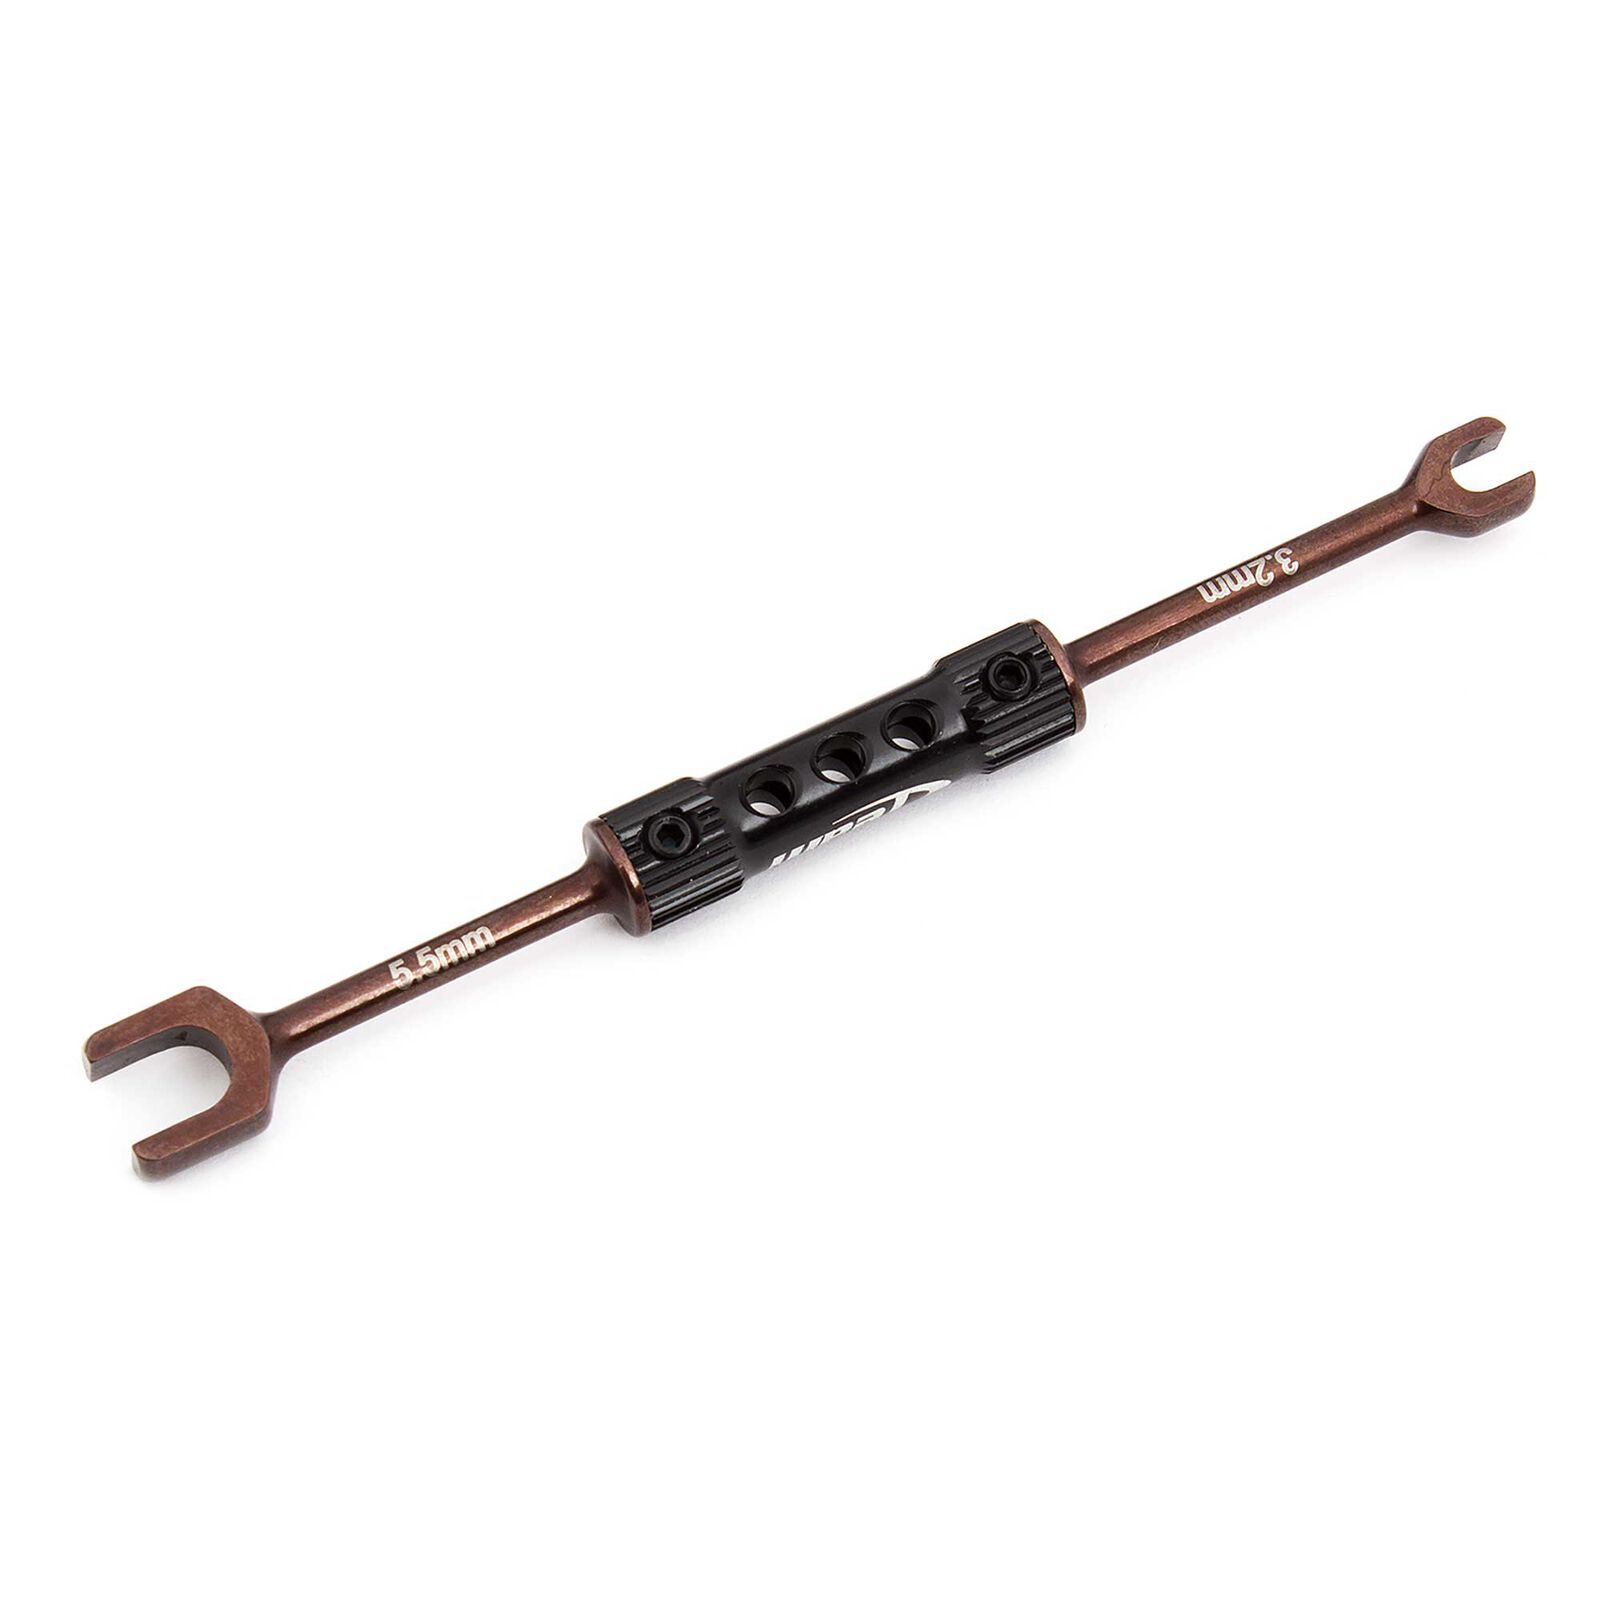 Factory Team Dual Turnbuckle Wrench (3.2mm and 5.5mm)